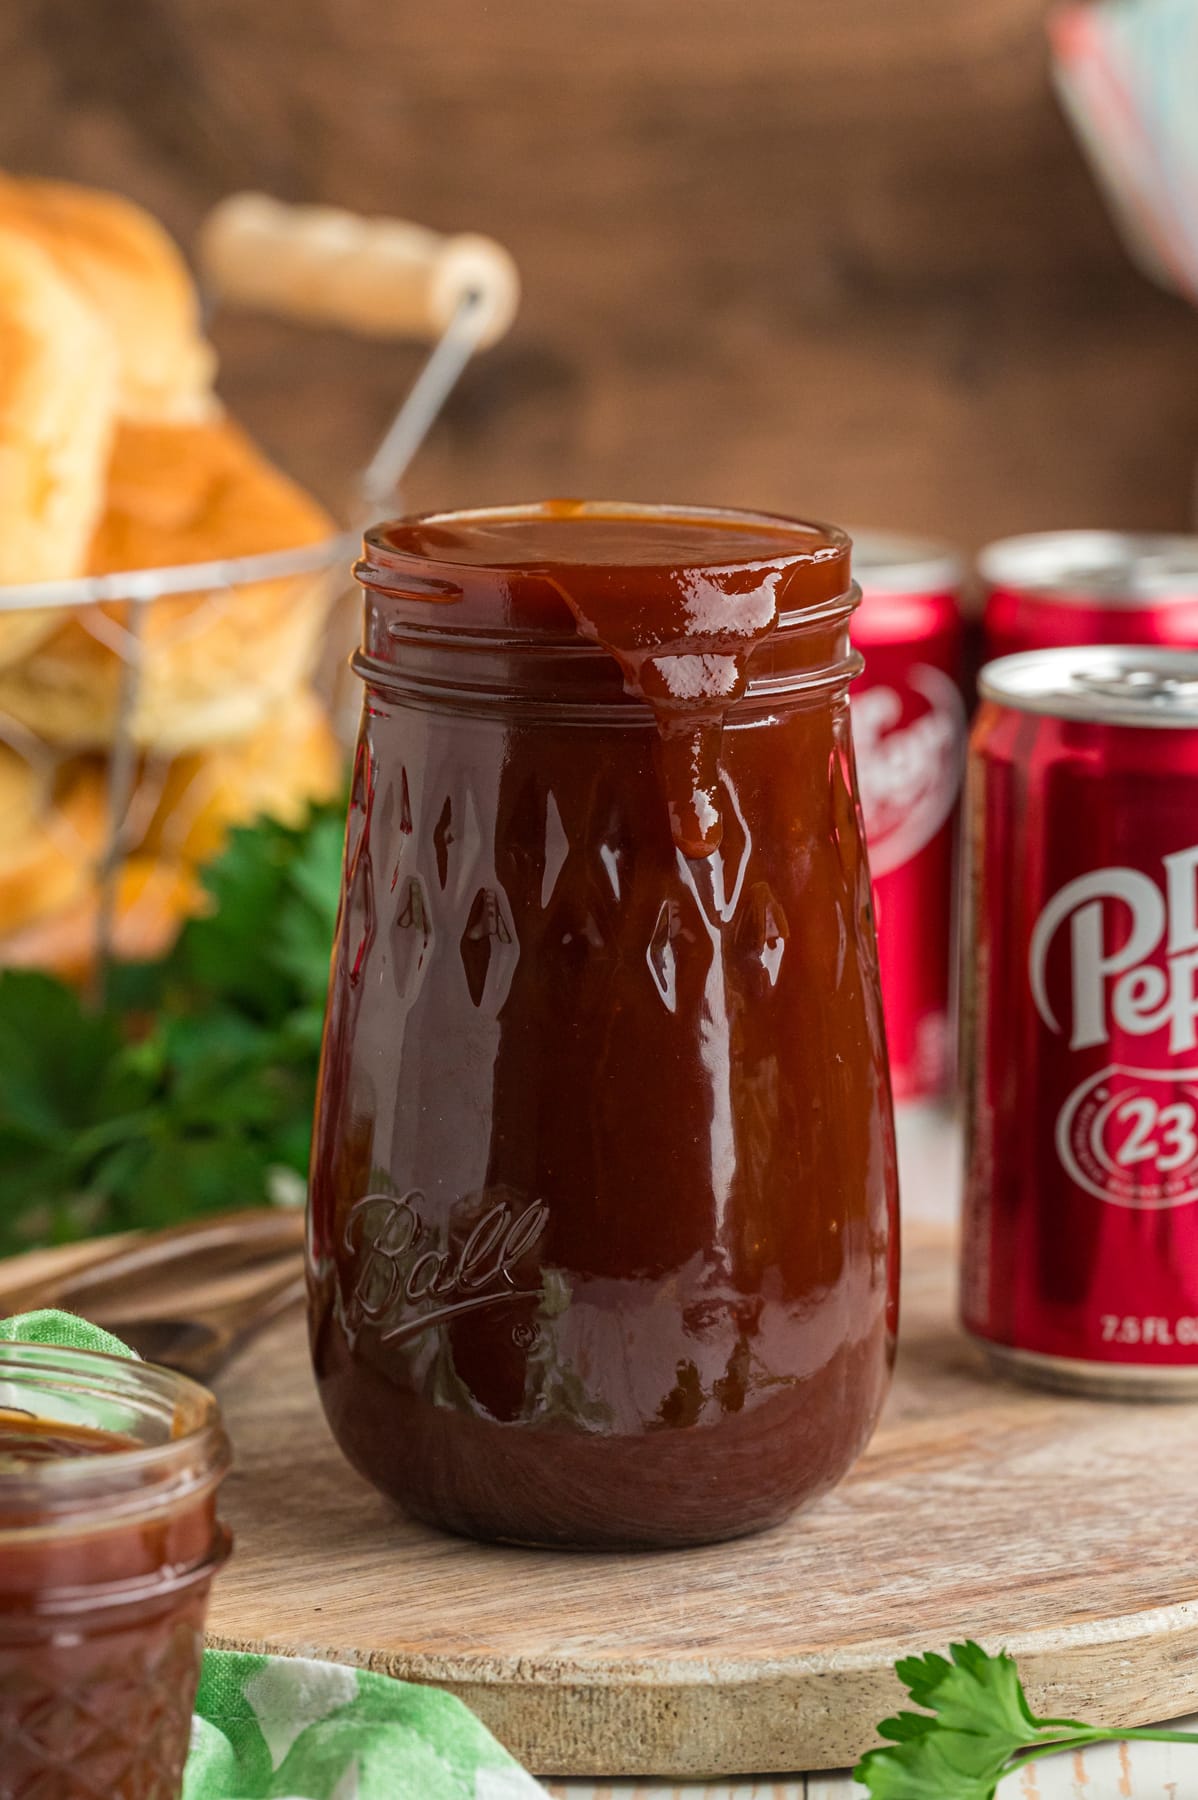 A jar of Dr Pepper BBQ sauce in front of soda cans